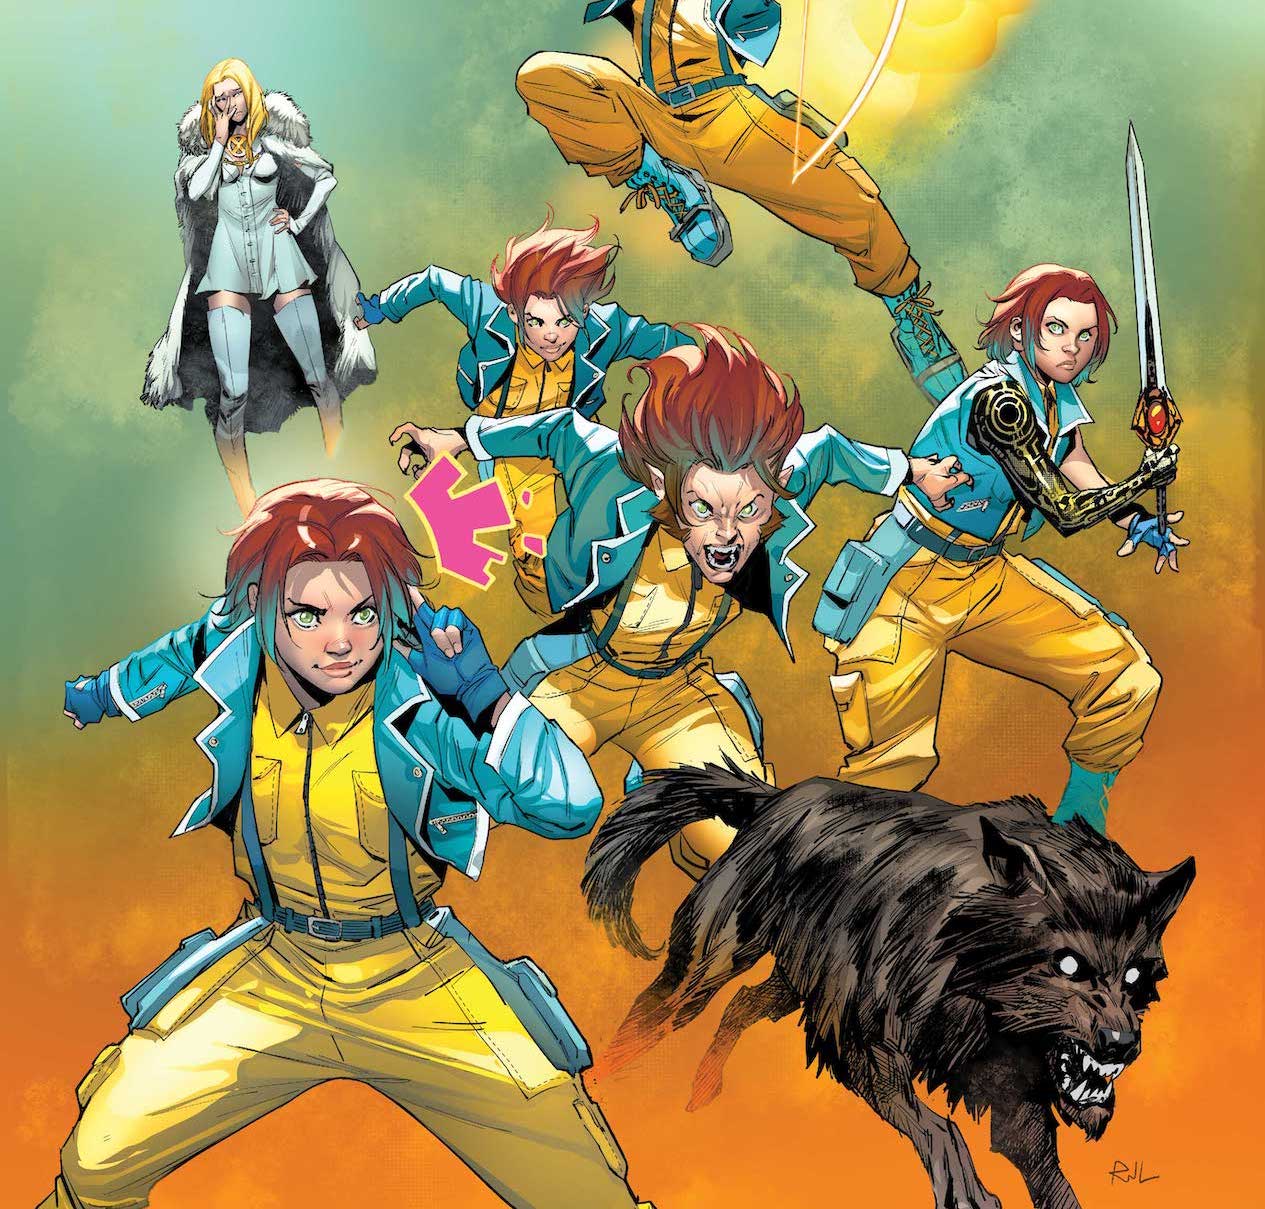 Escapade returns in three issue 'New Mutants' story arc October 26th